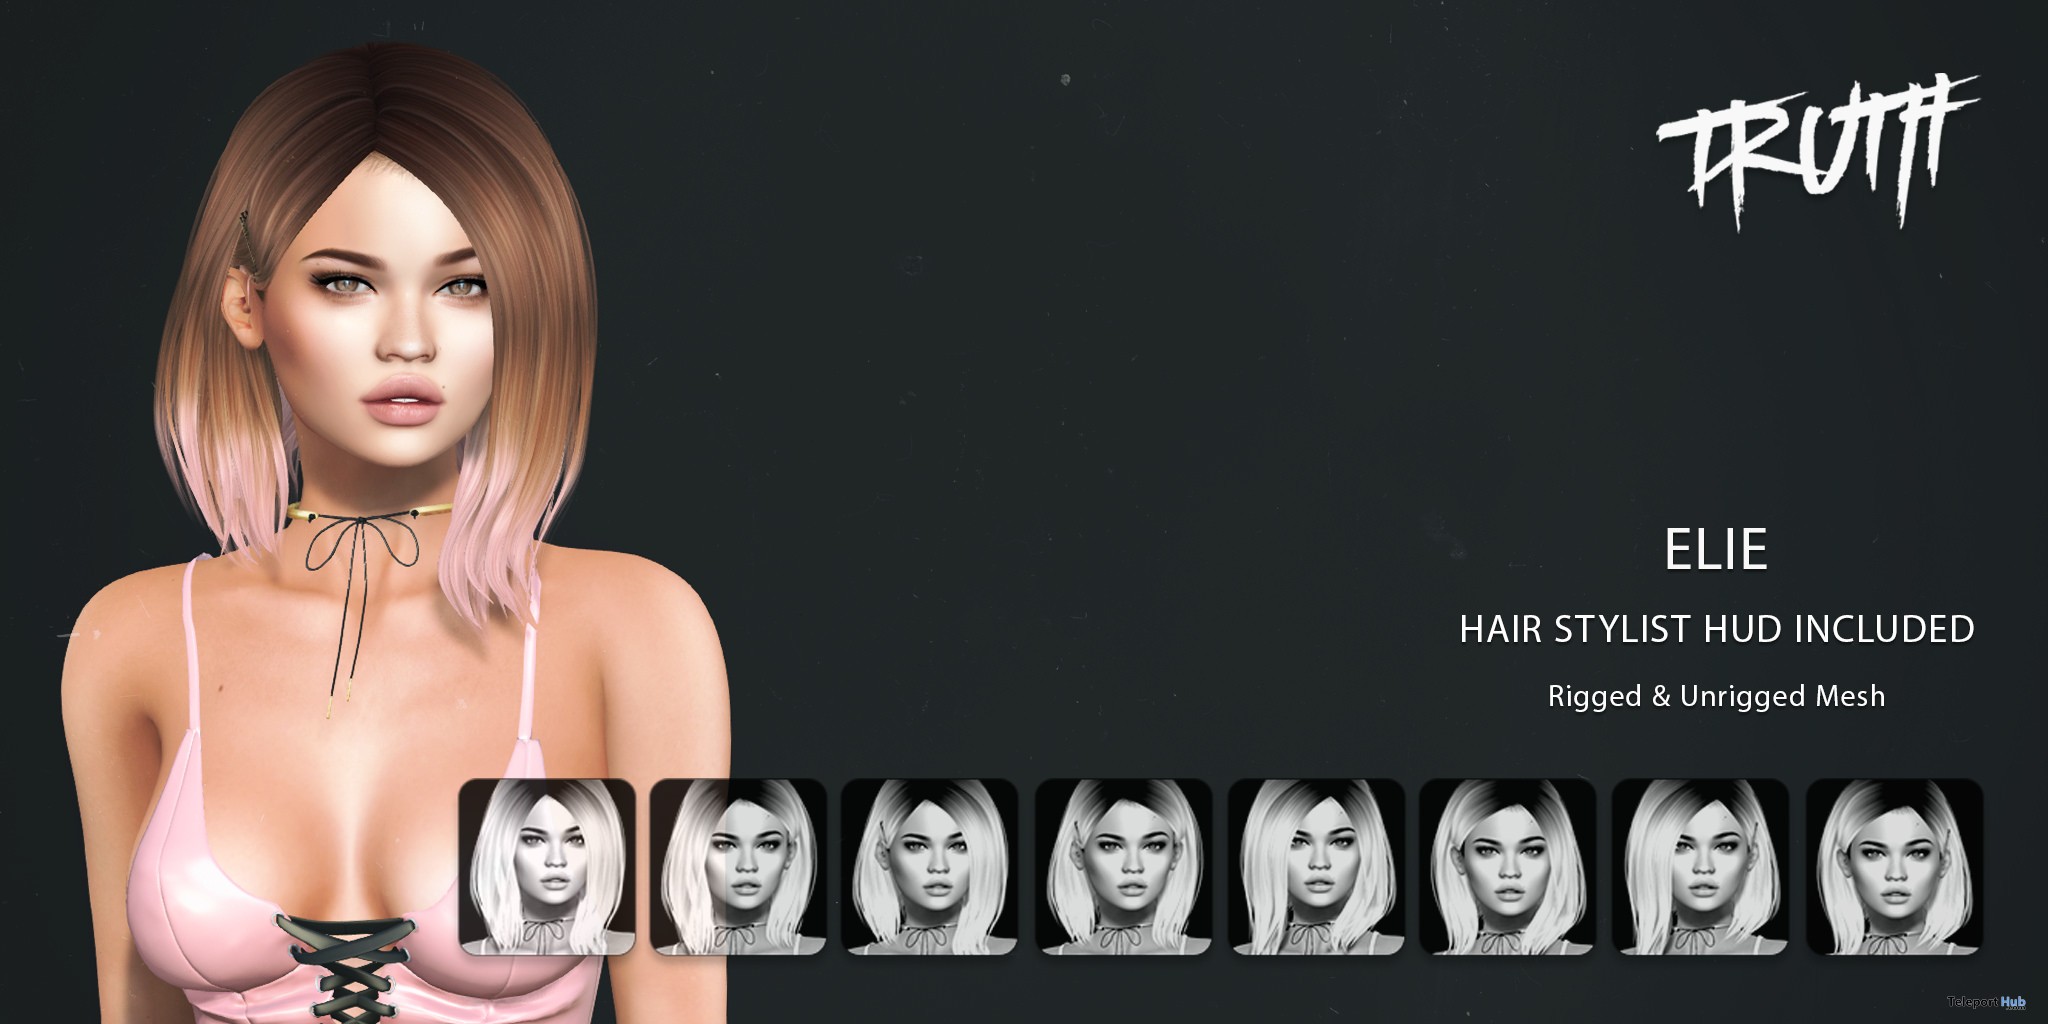 Elie Hair With Stylist HUD August 2017 VIP Group Gift by TRUTH HAIR - Teleport Hub - teleporthub.com